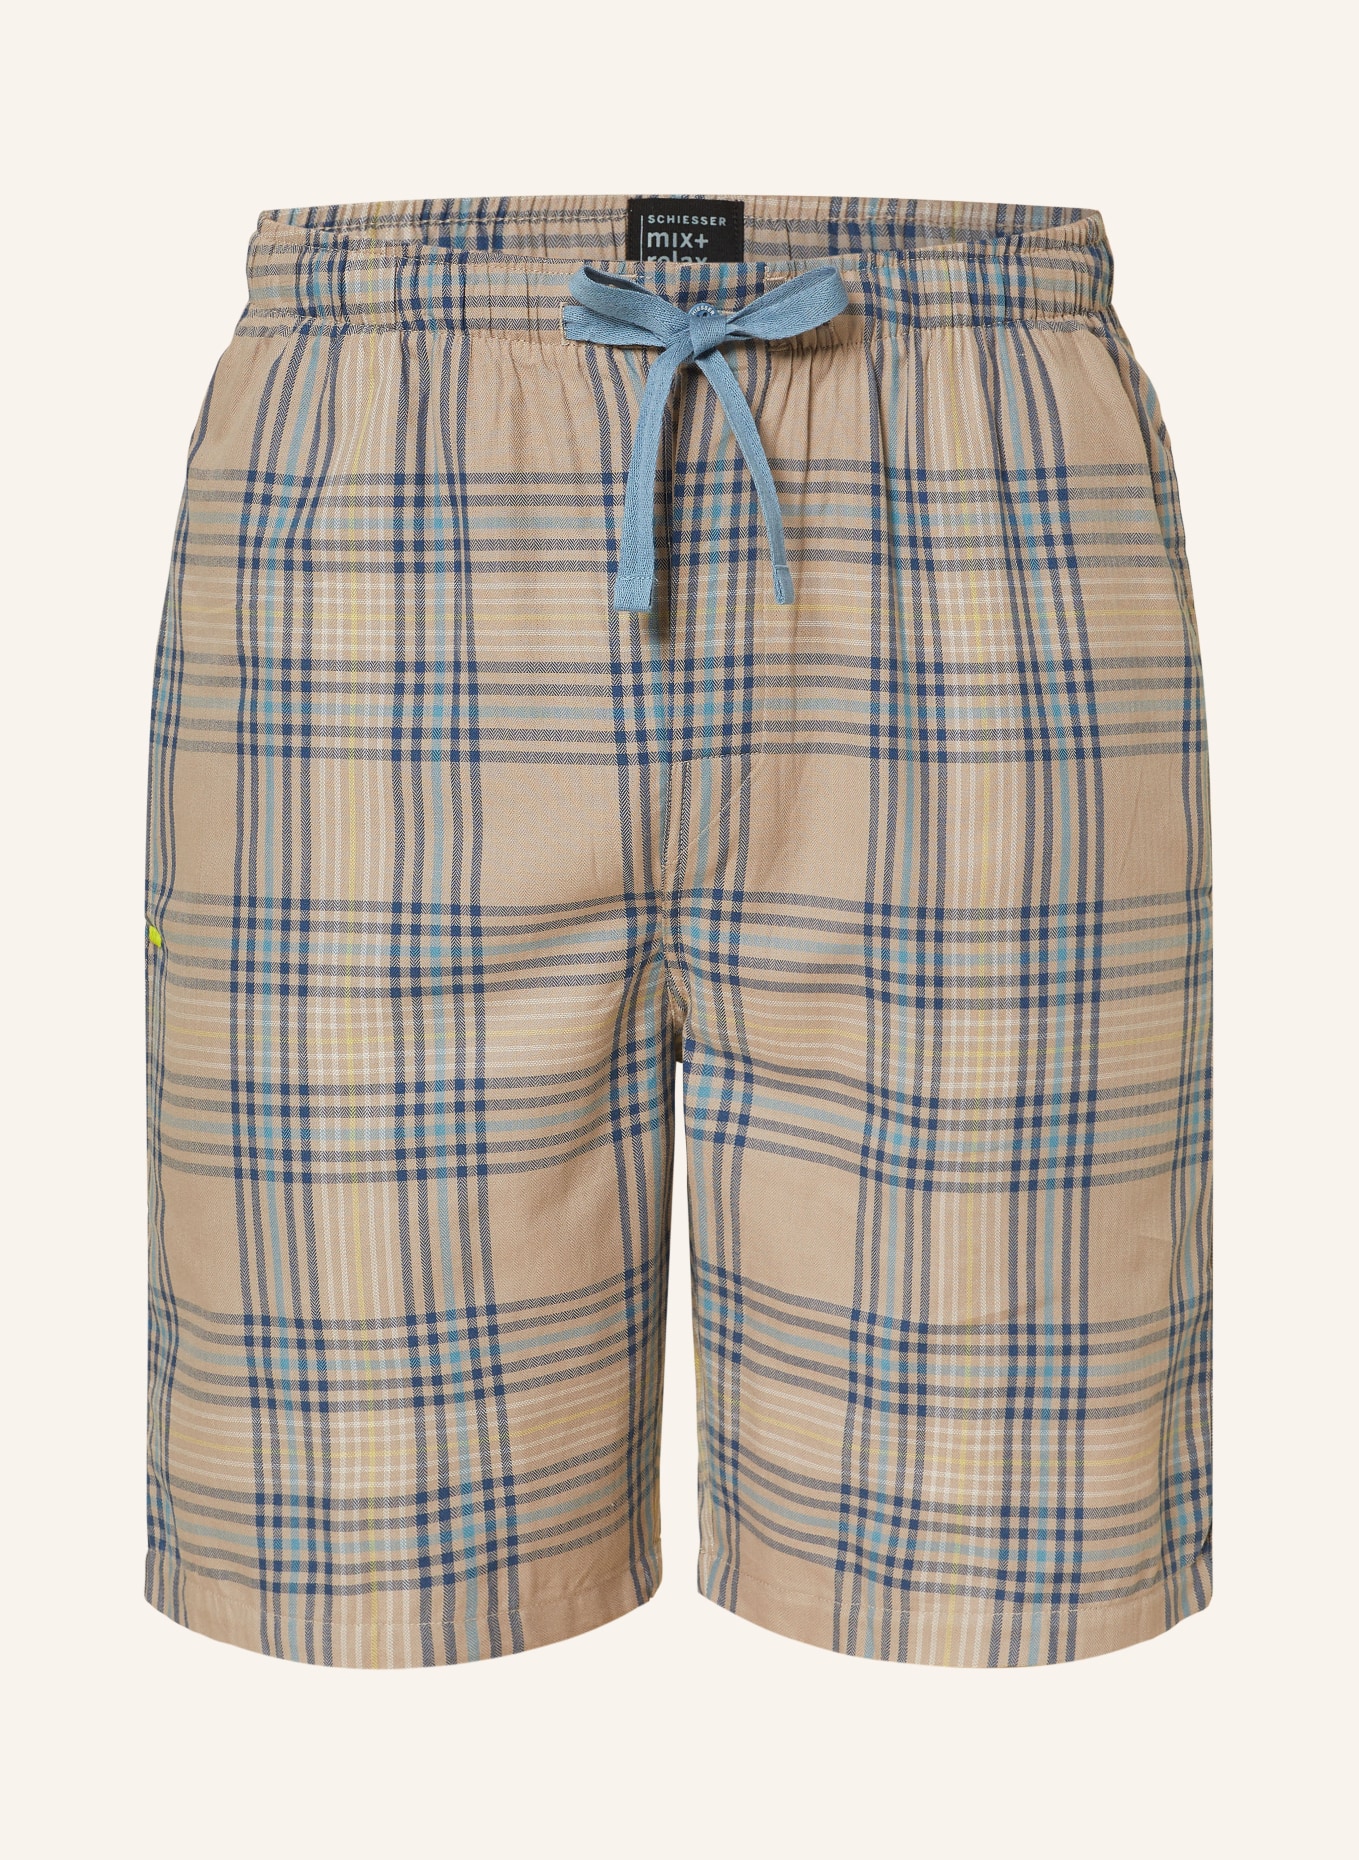 SCHIESSER Pajama shorts MIX+RELAX, Color: TAUPE/ DARK BLUE/ TURQUOISE (Image 1)